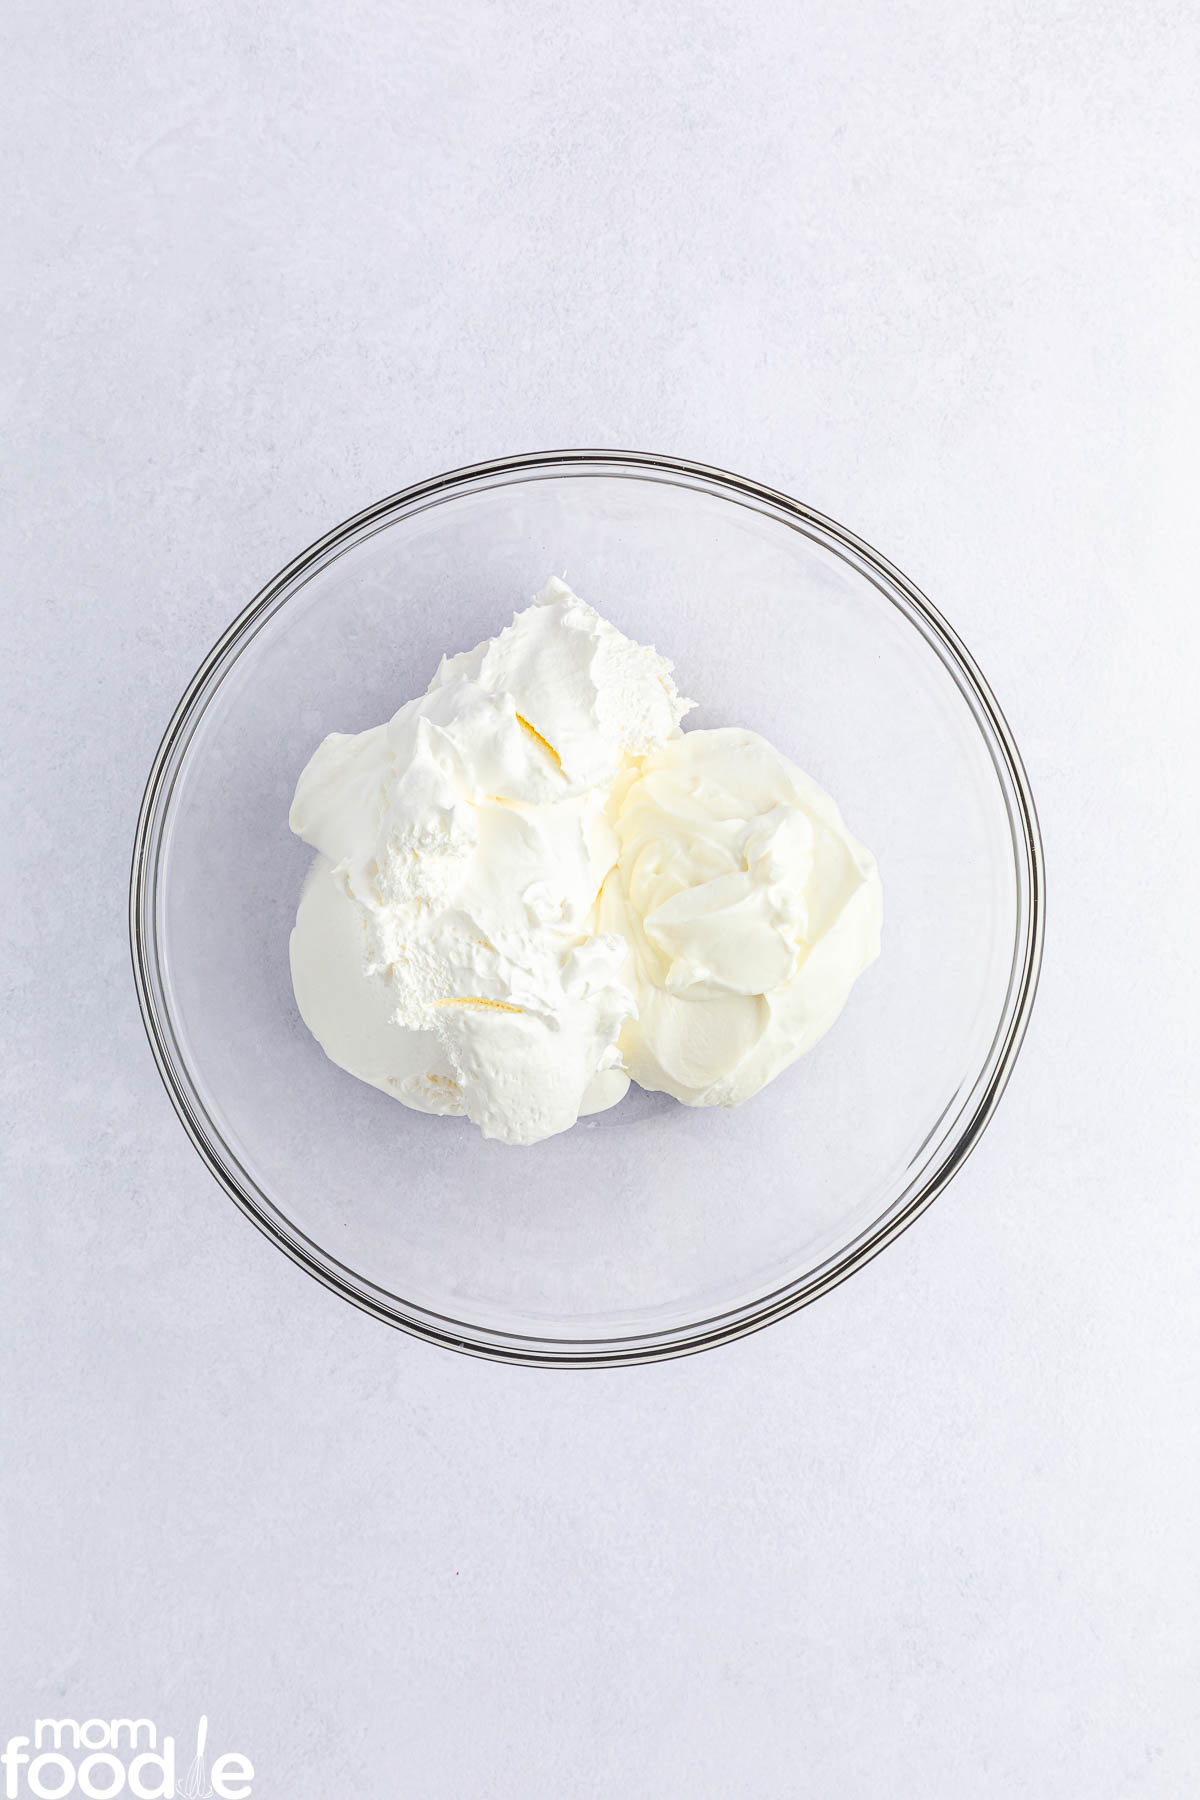 yogurt (or sour cream) and cool whip in bowl